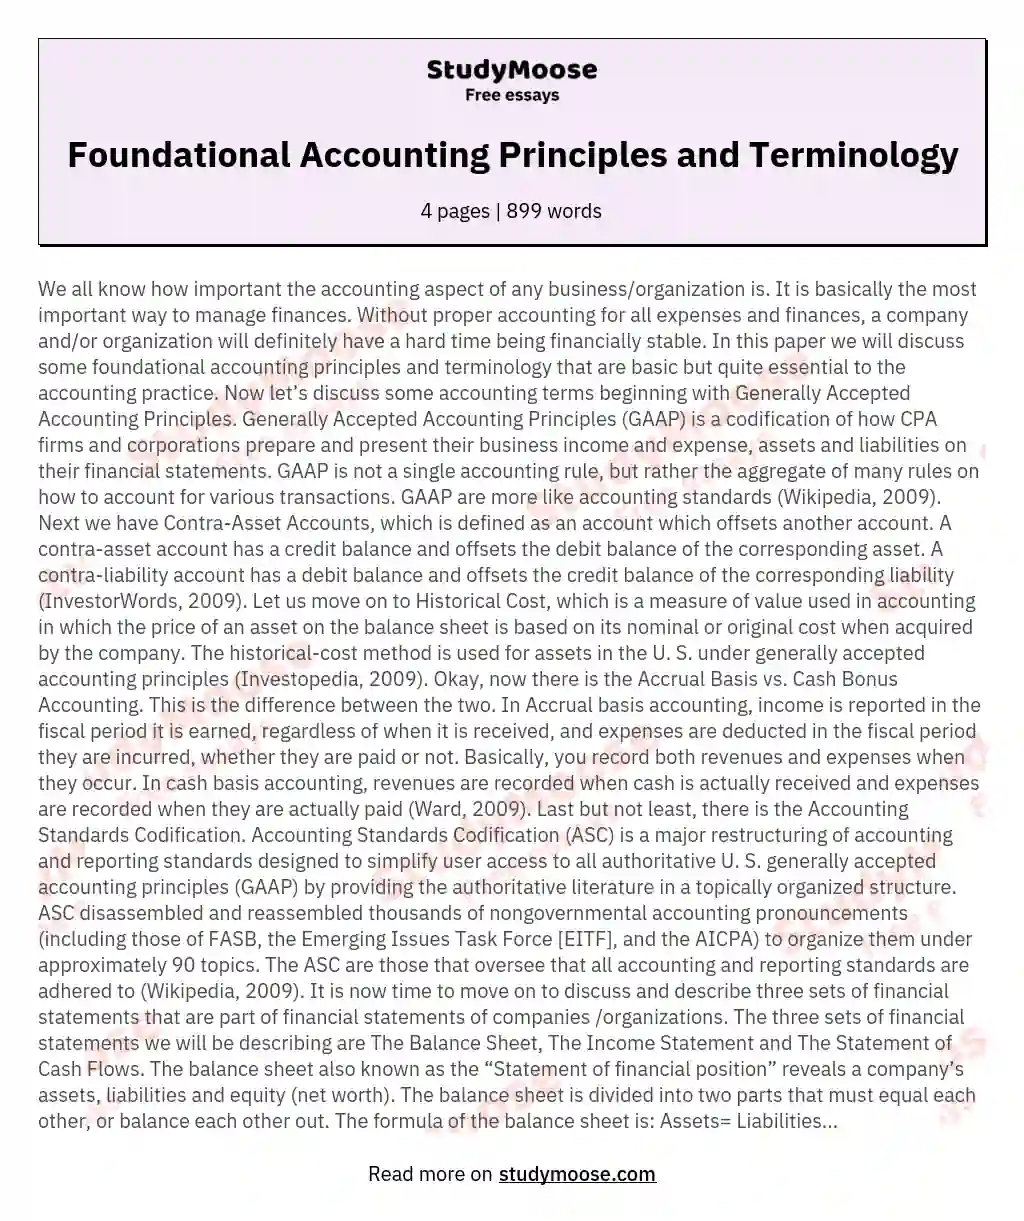 Foundational Accounting Principles and Terminology